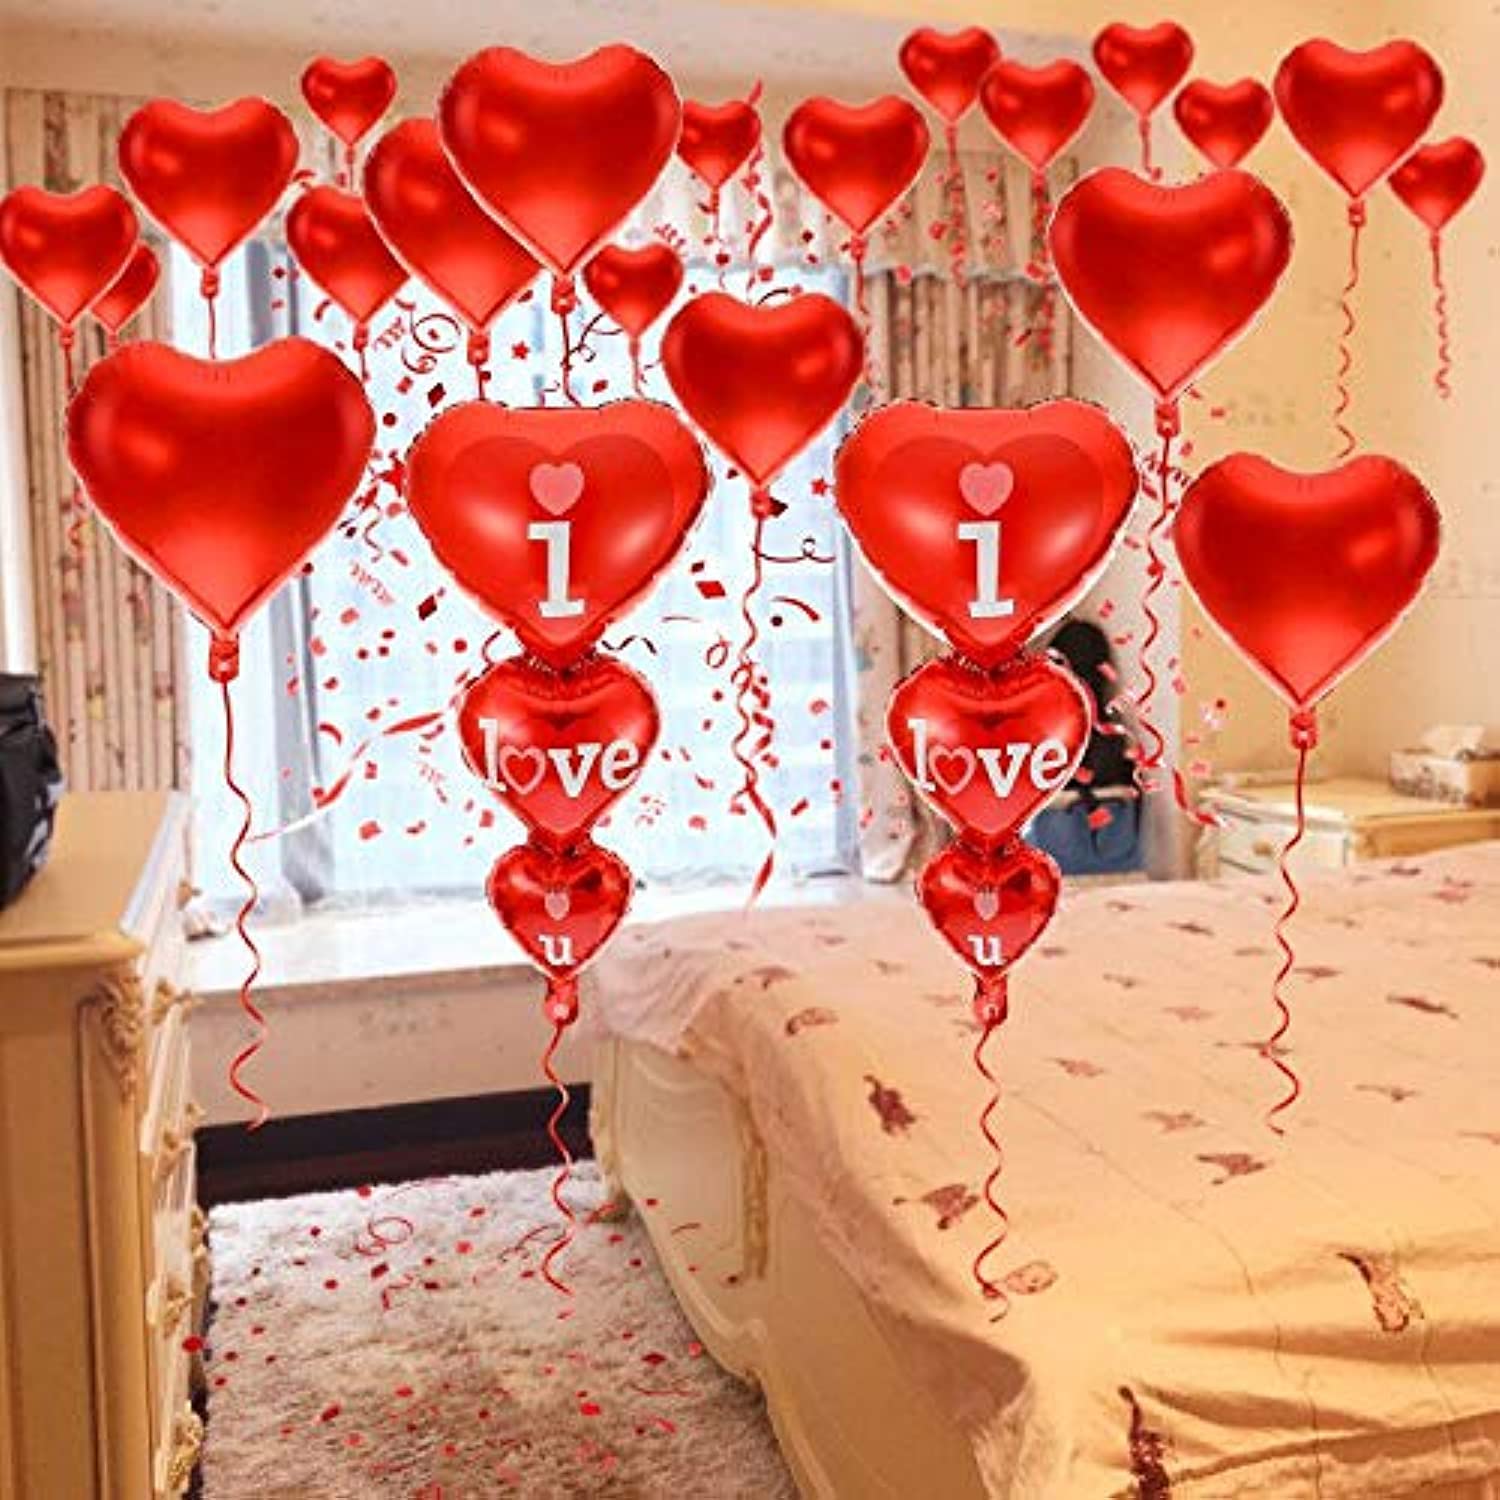 Red and white heart-shaped balloons